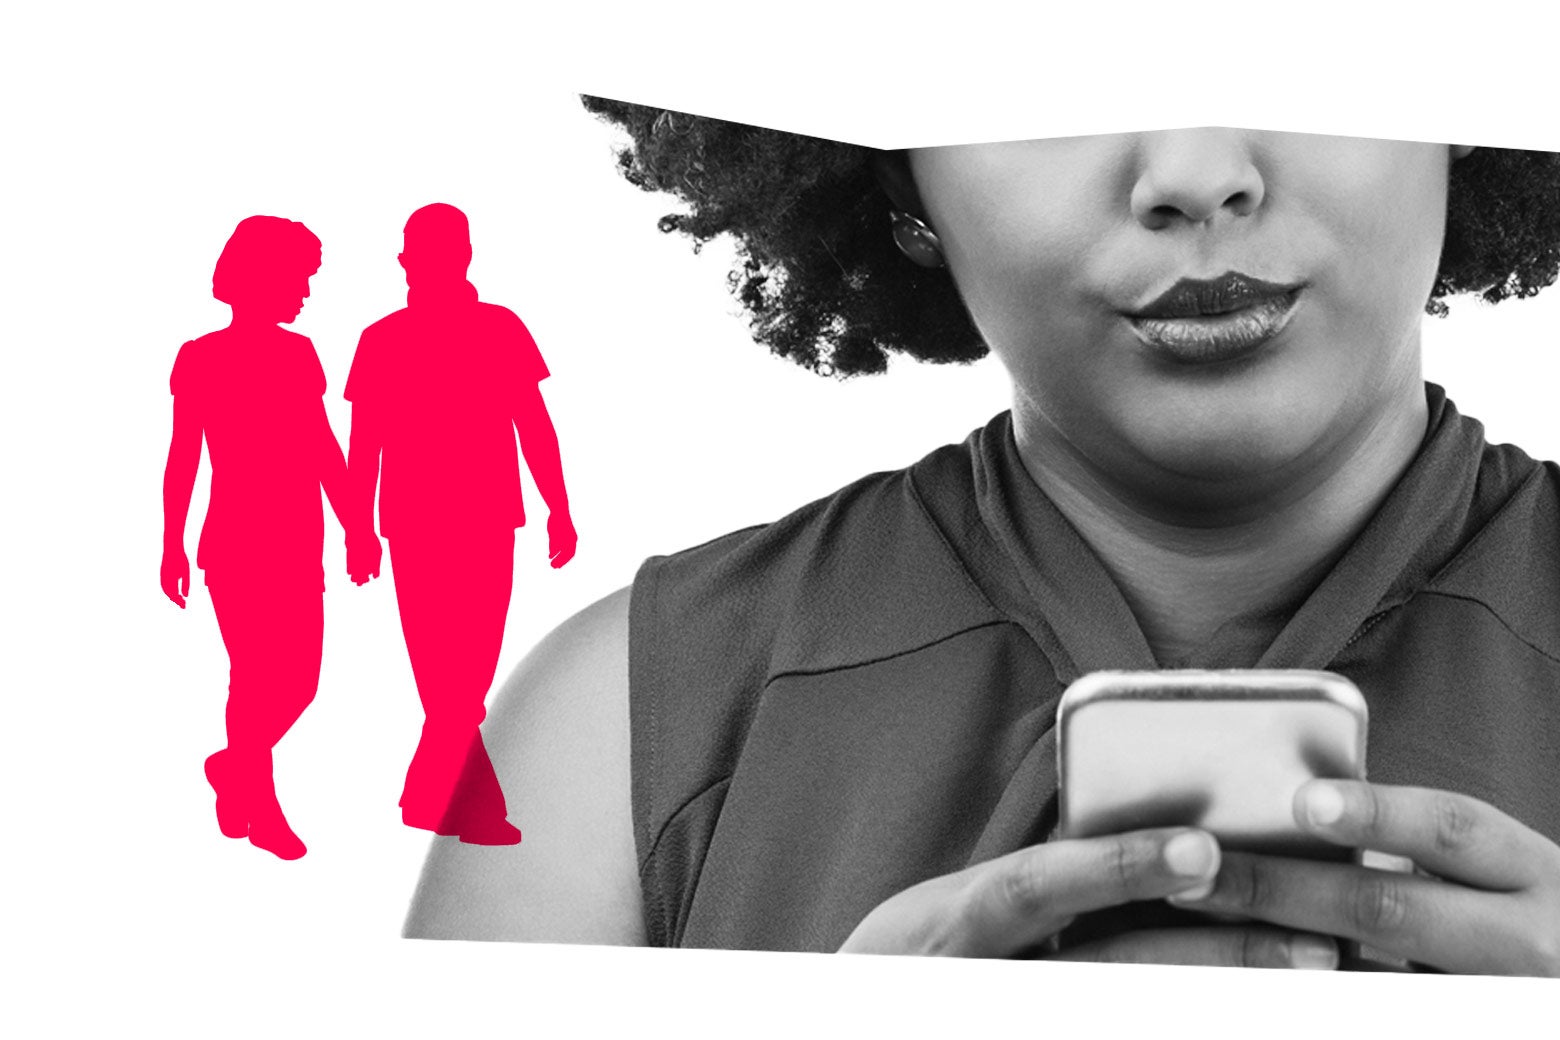 Silhouettes of a couple holding hands hovering next to a woman pursing her lips as she types on her phone